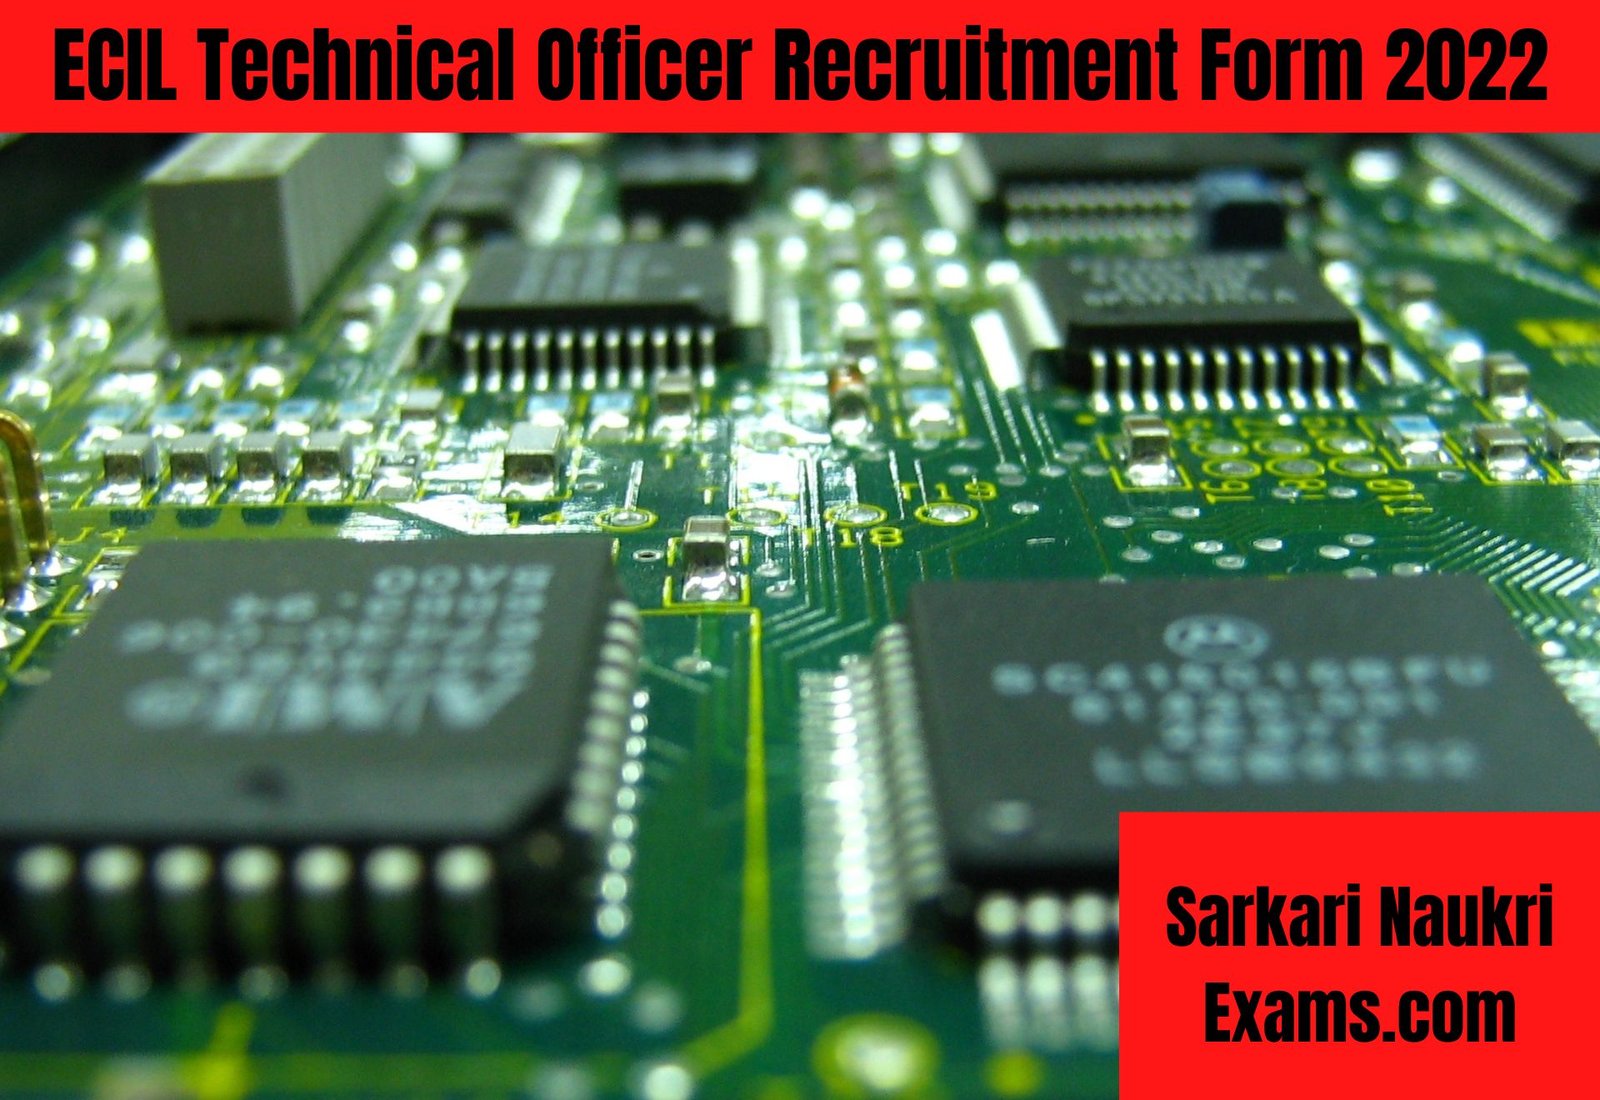 ECIL Technical Officer Recruitment Form 2022 | Interview Based Job